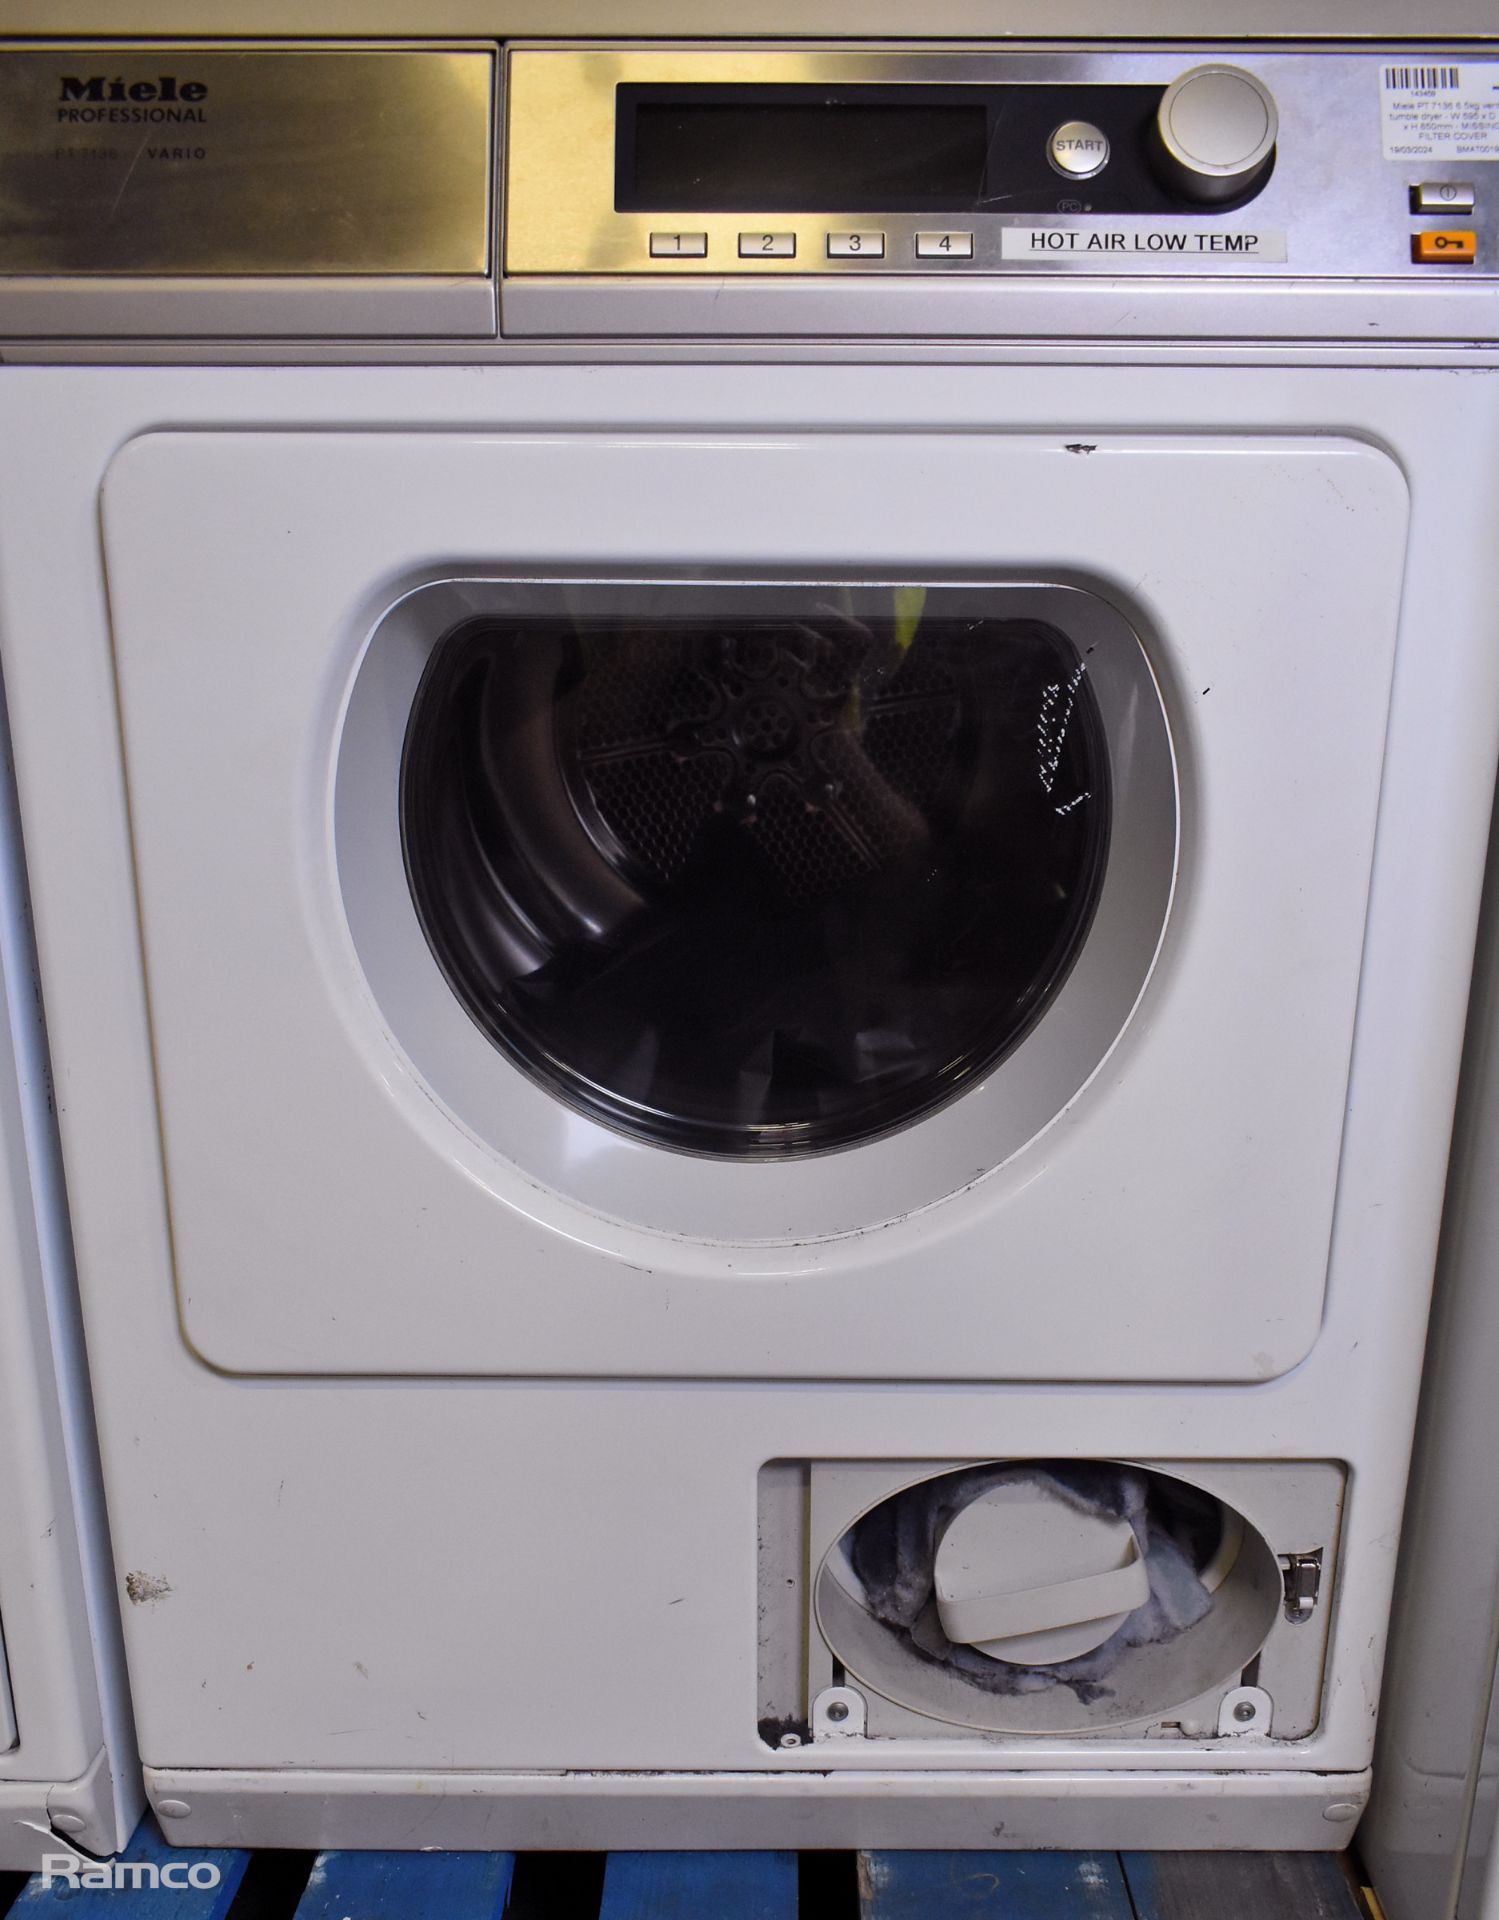 Miele PT 7136 6.5kg vented tumble dryer - W 595 x D 700 x H 850mm - MISSING FILTER COVER - Image 3 of 6